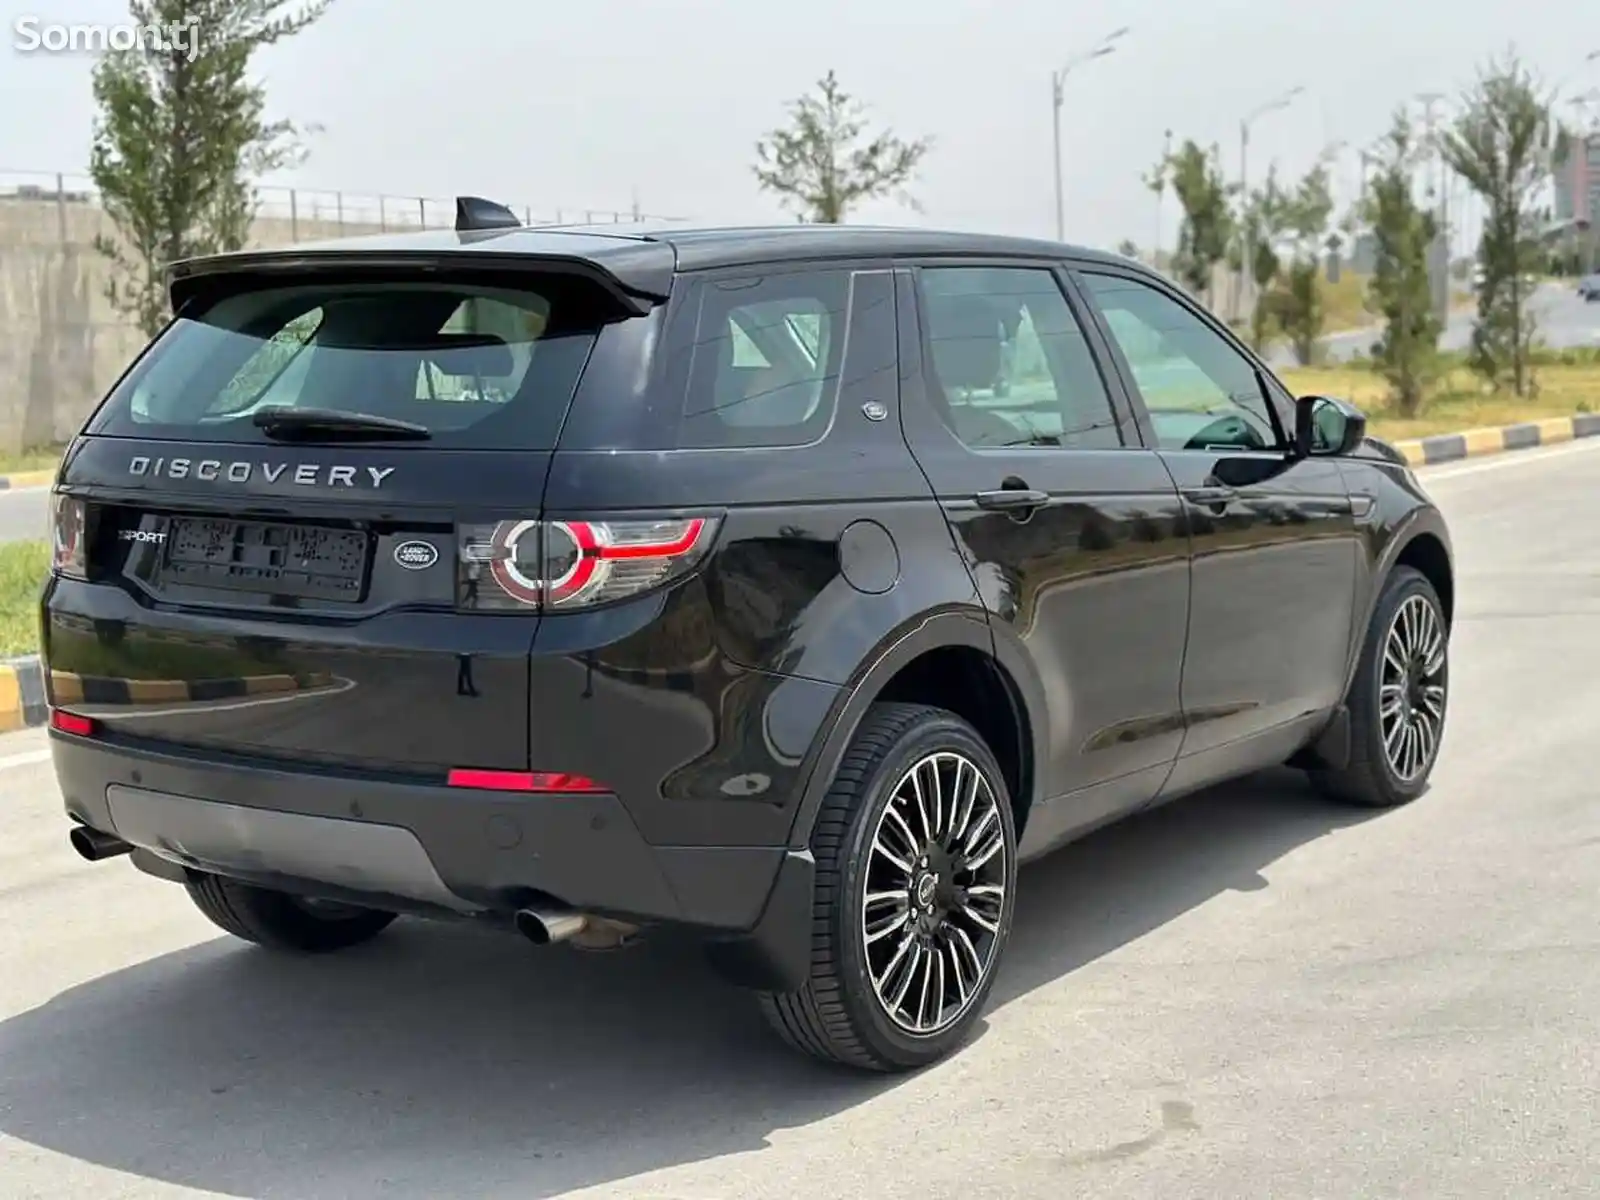 Land Rover Discovery, 2018-6